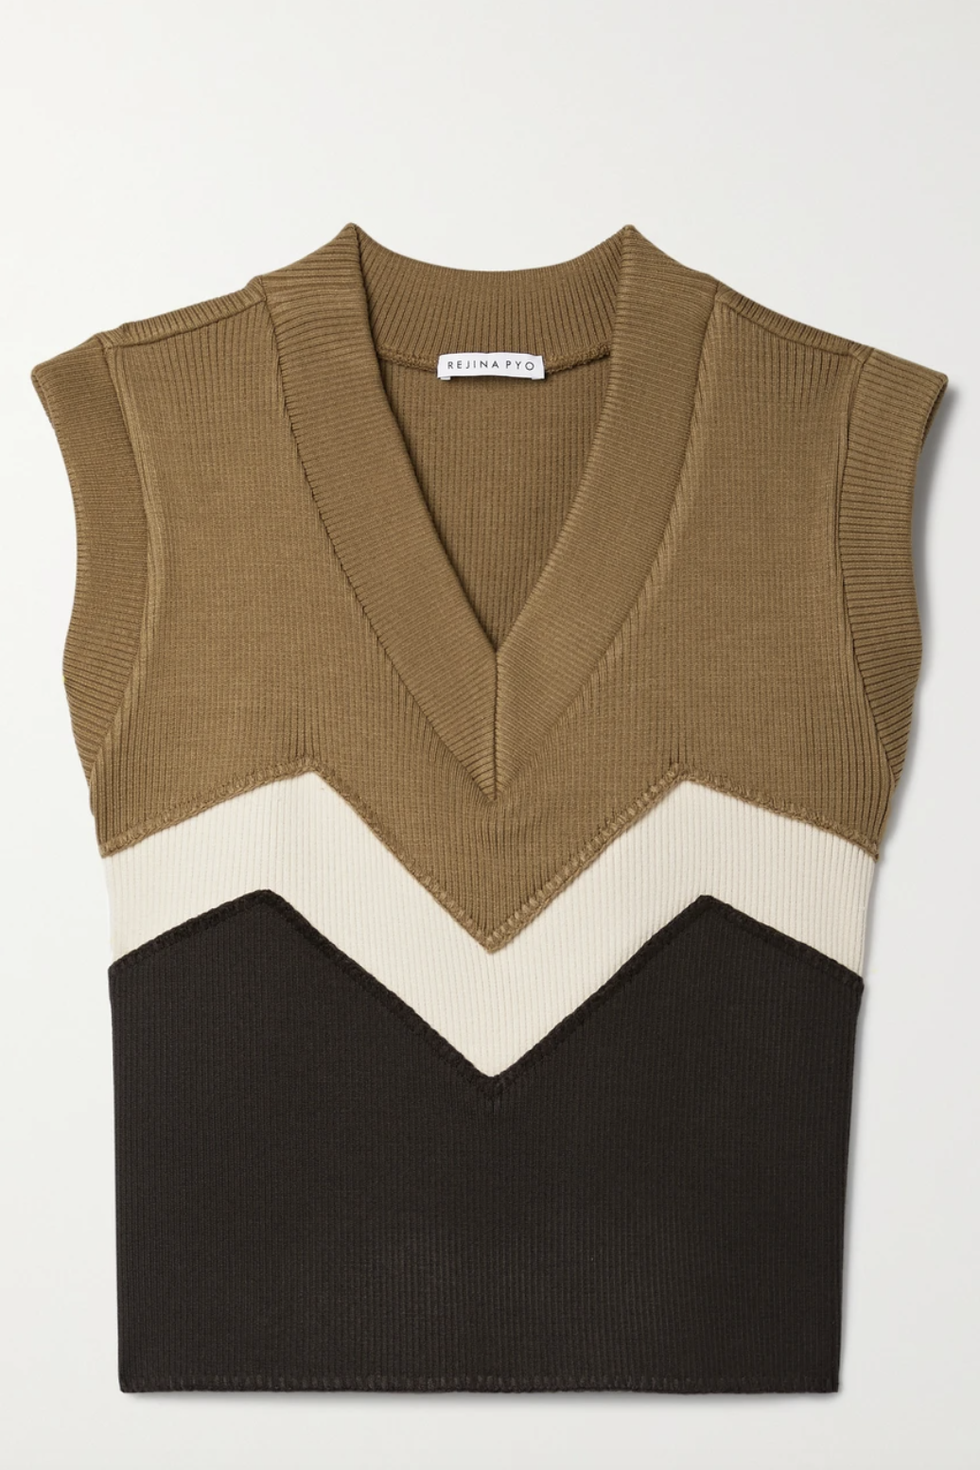 The Best Women's Sweater Vests to Layer Over Everything